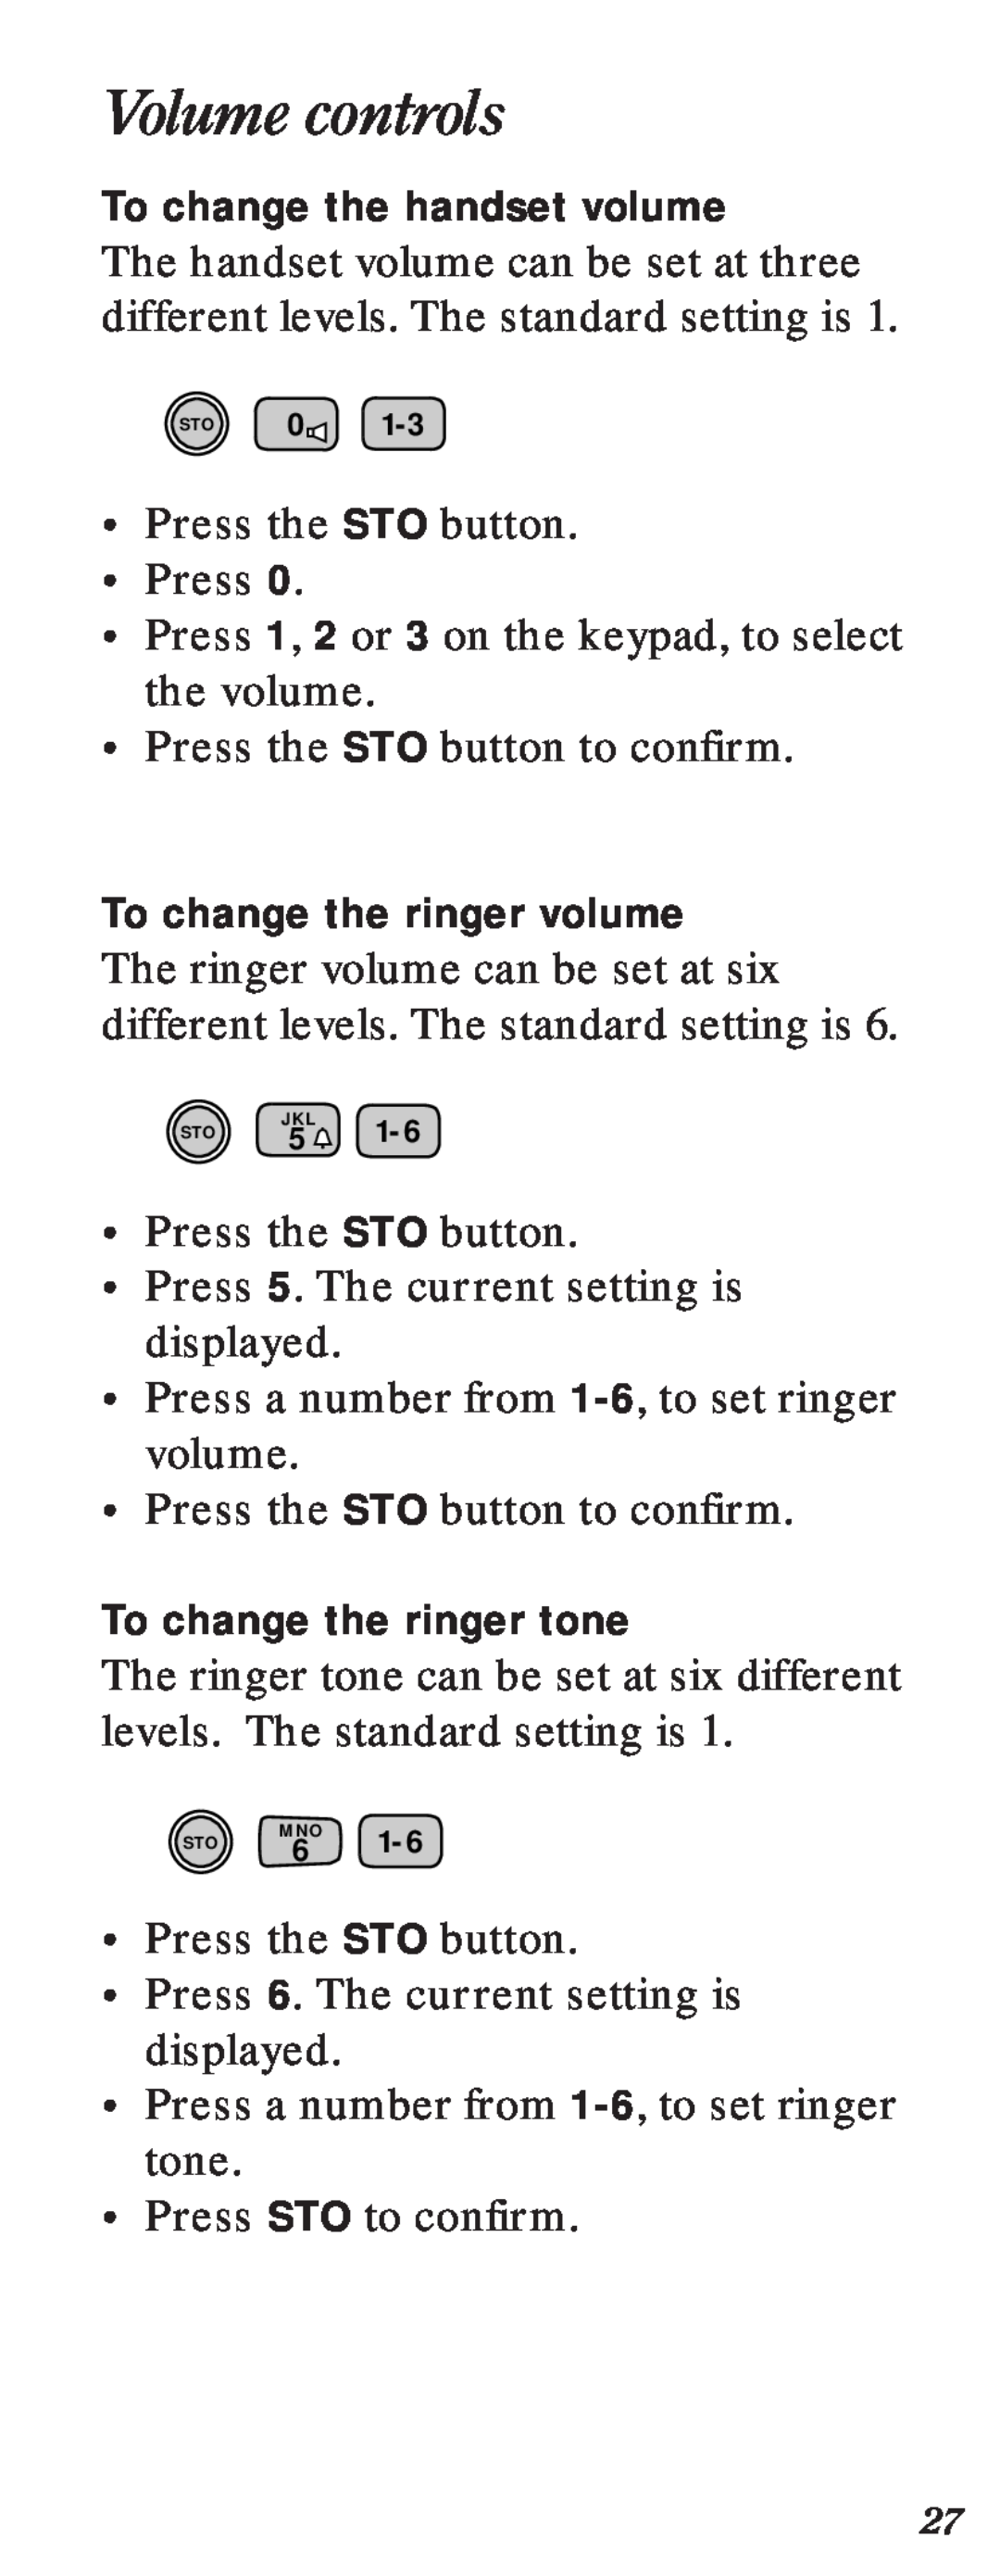 BT 2000 user manual Volume controls, To change the handset volume, To change the ringer volume, To change the ringer tone 